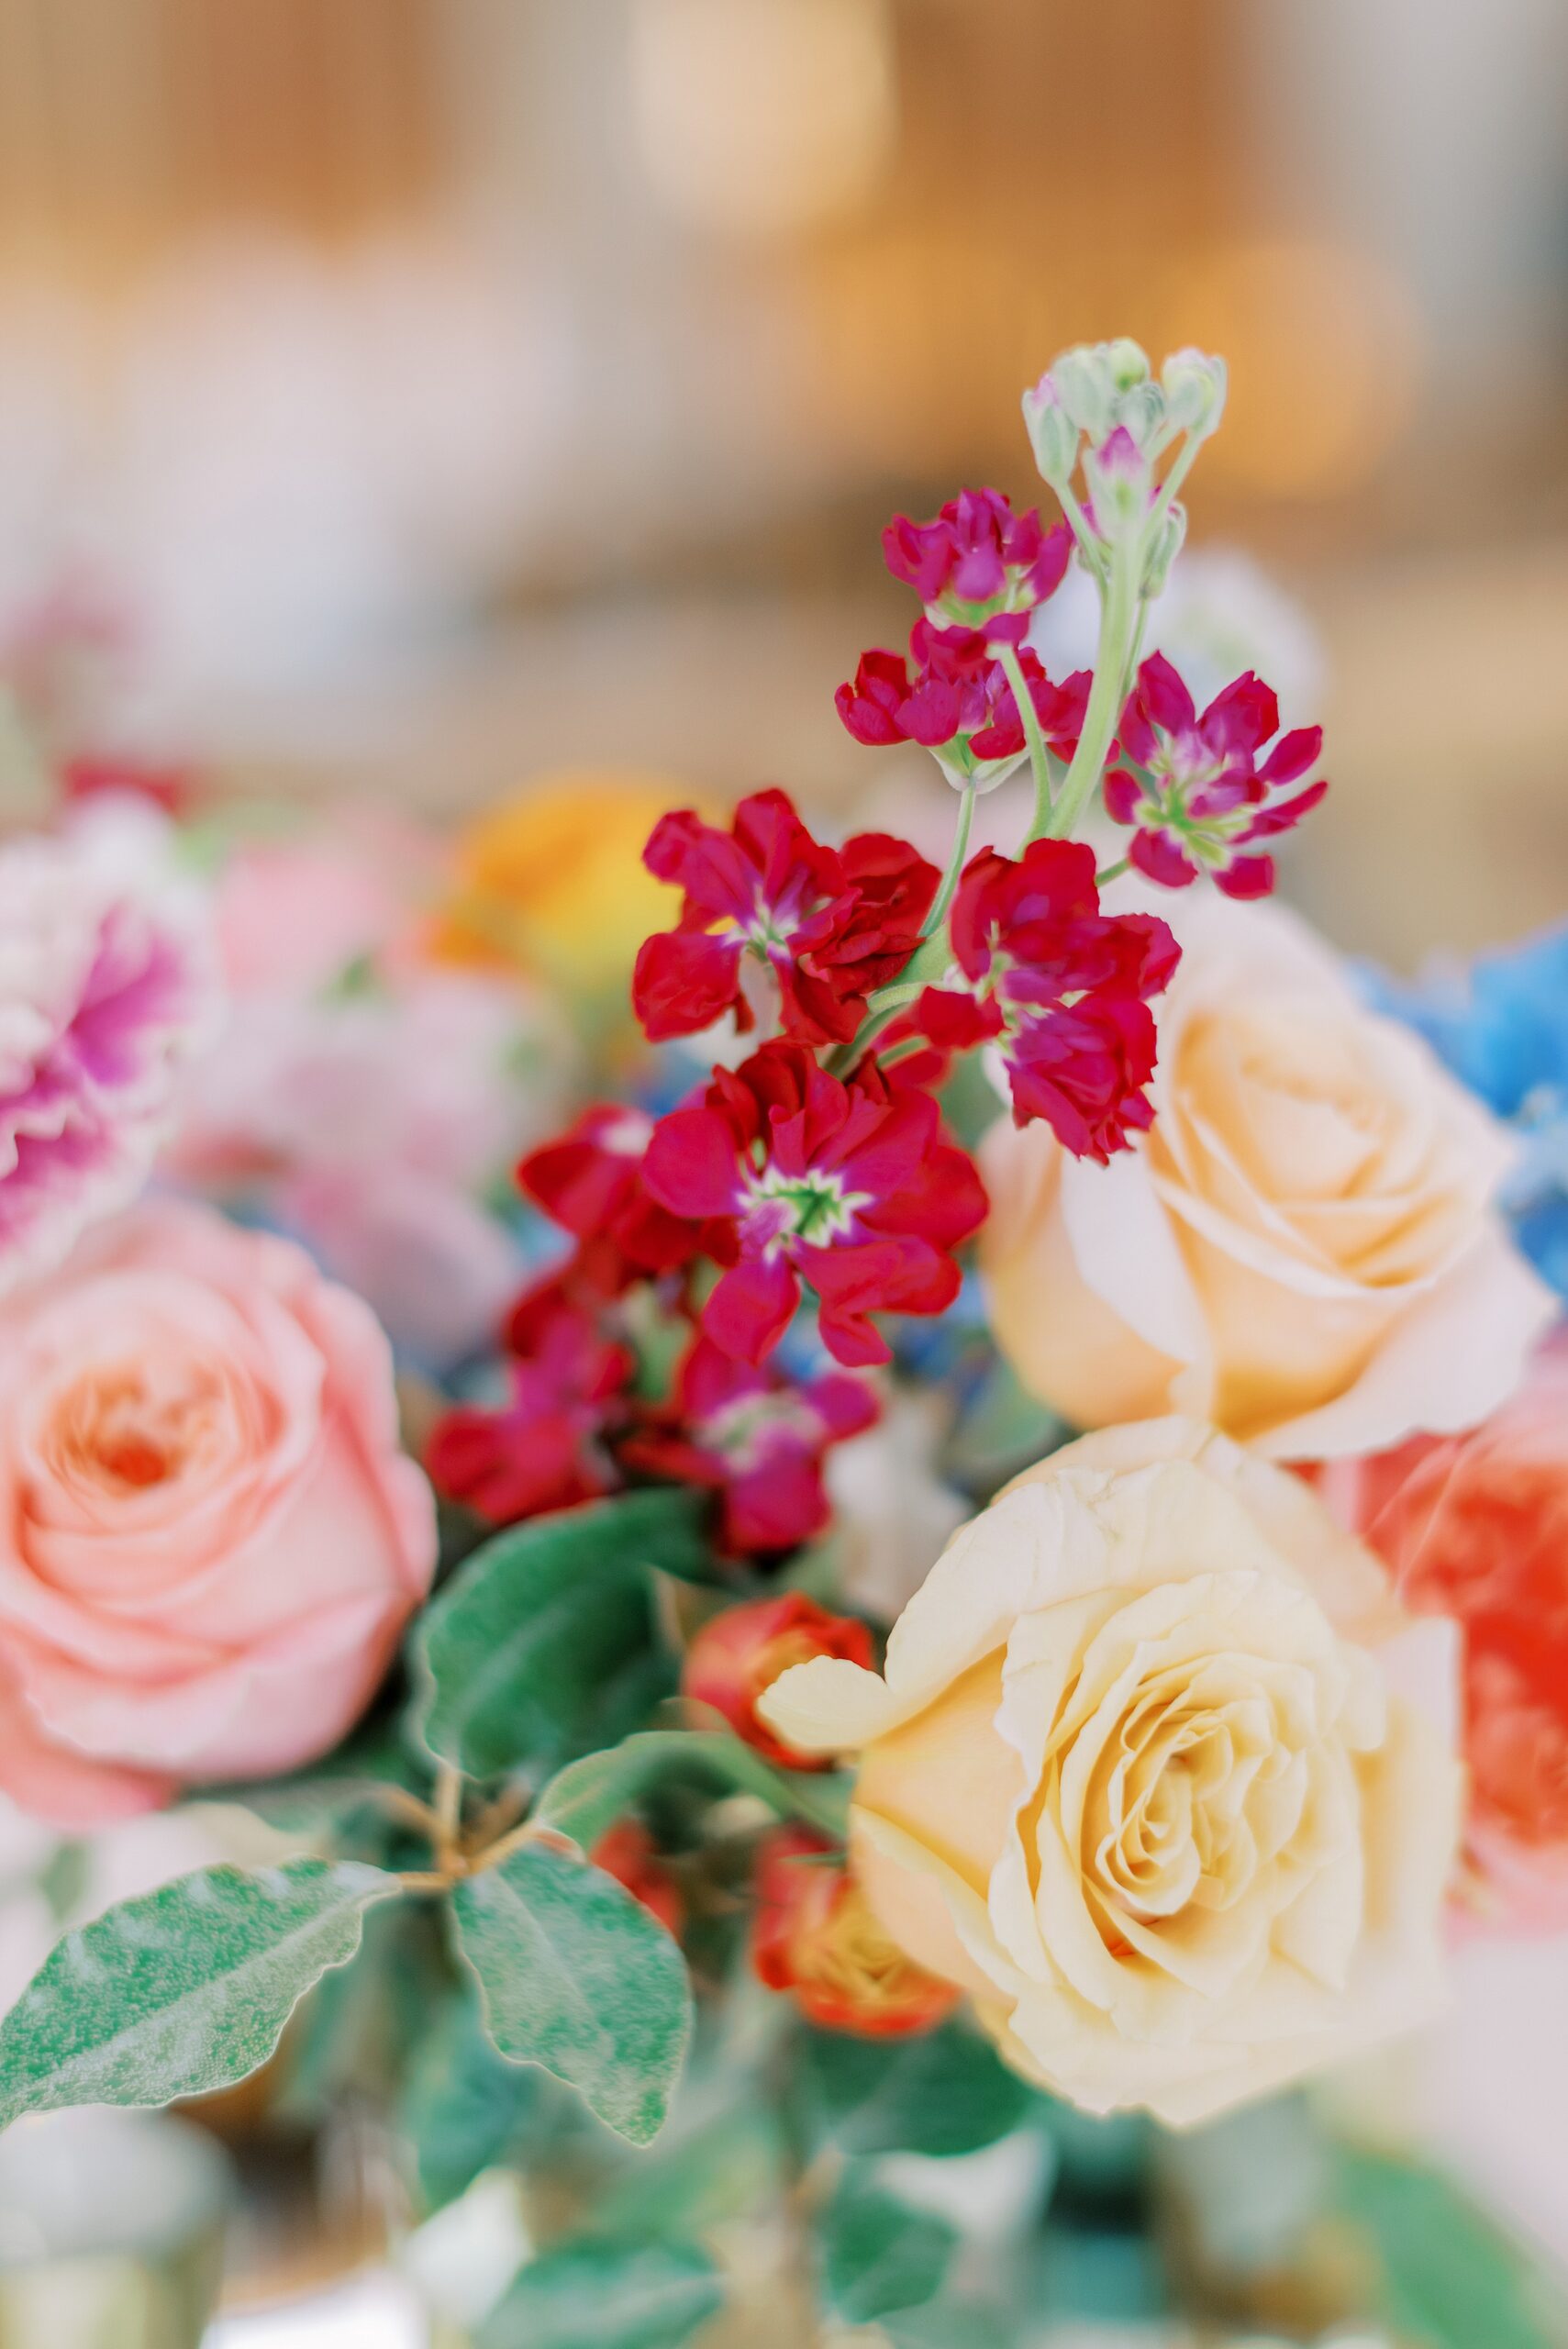 Details of a wedding centerpiece with colorful roses